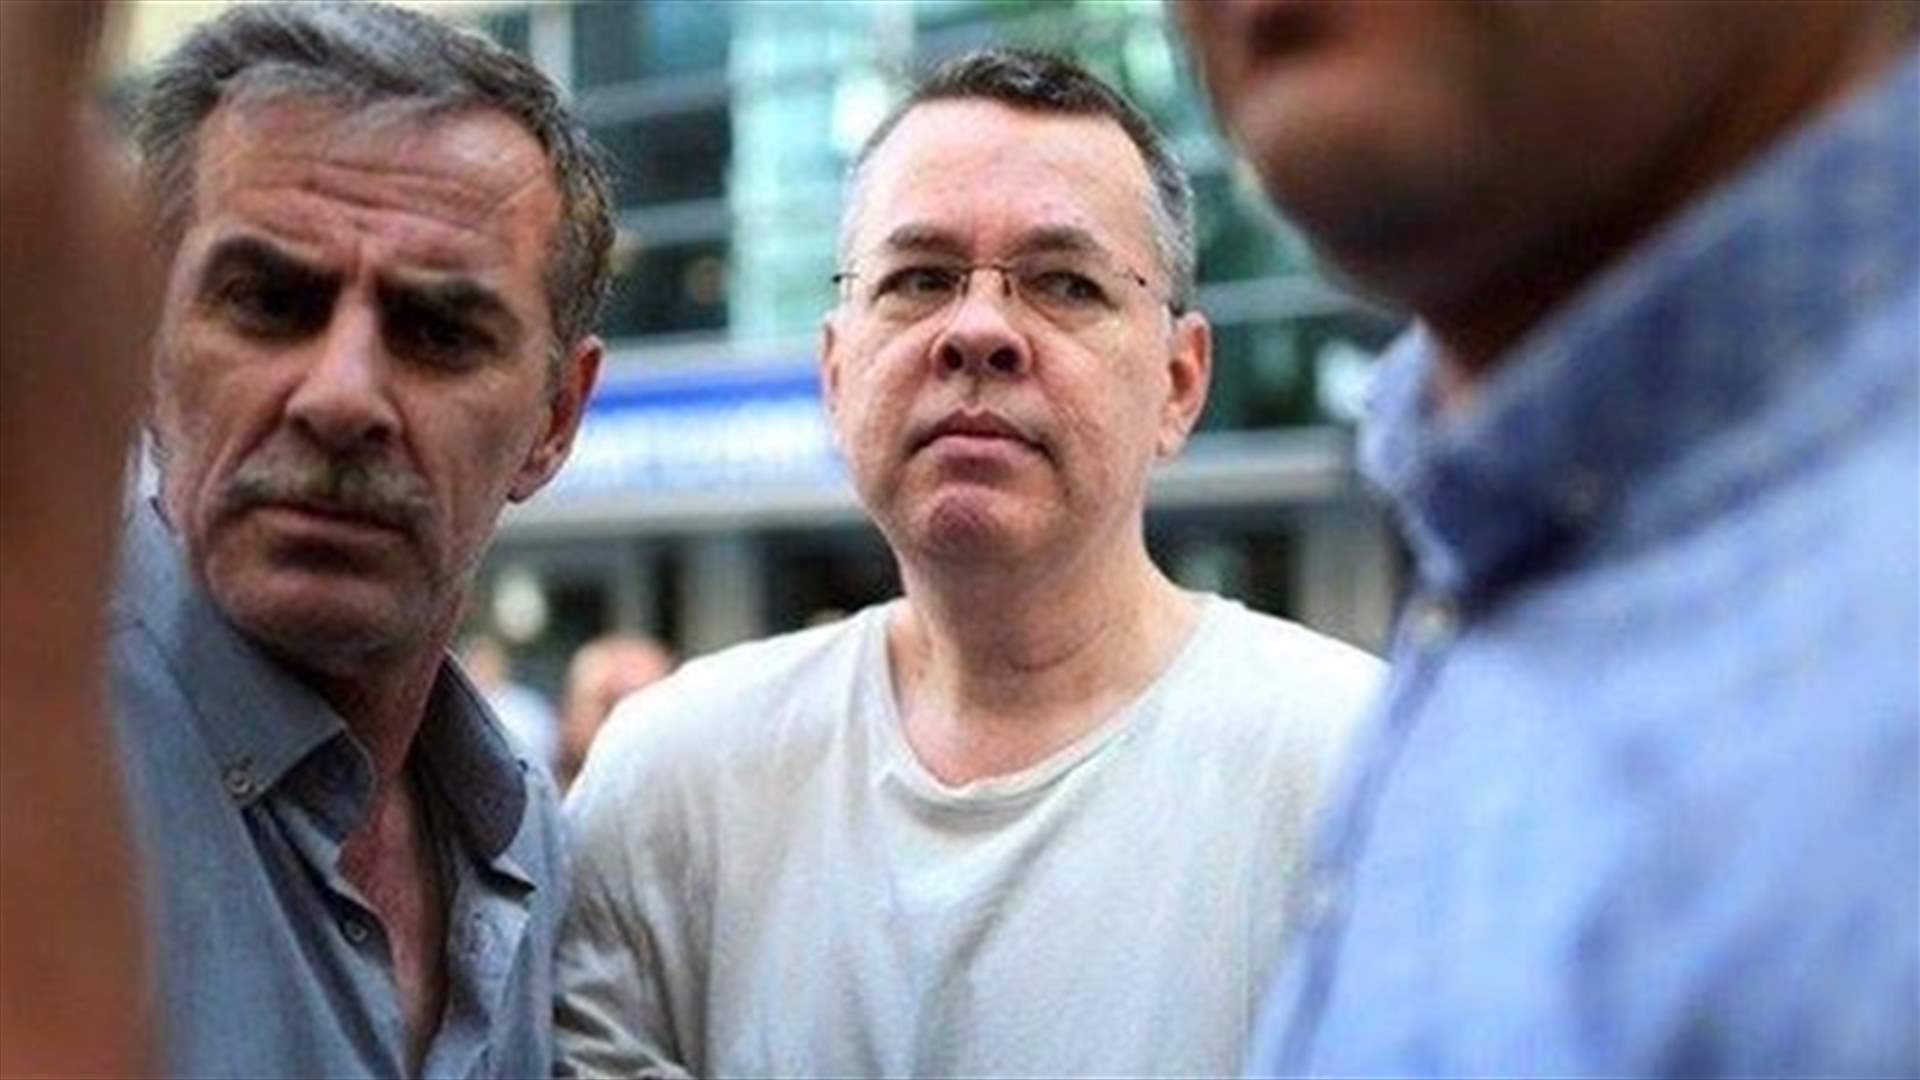 Turkish court rejects US pastor&#39;s appeal, upper court yet to rule - lawyer